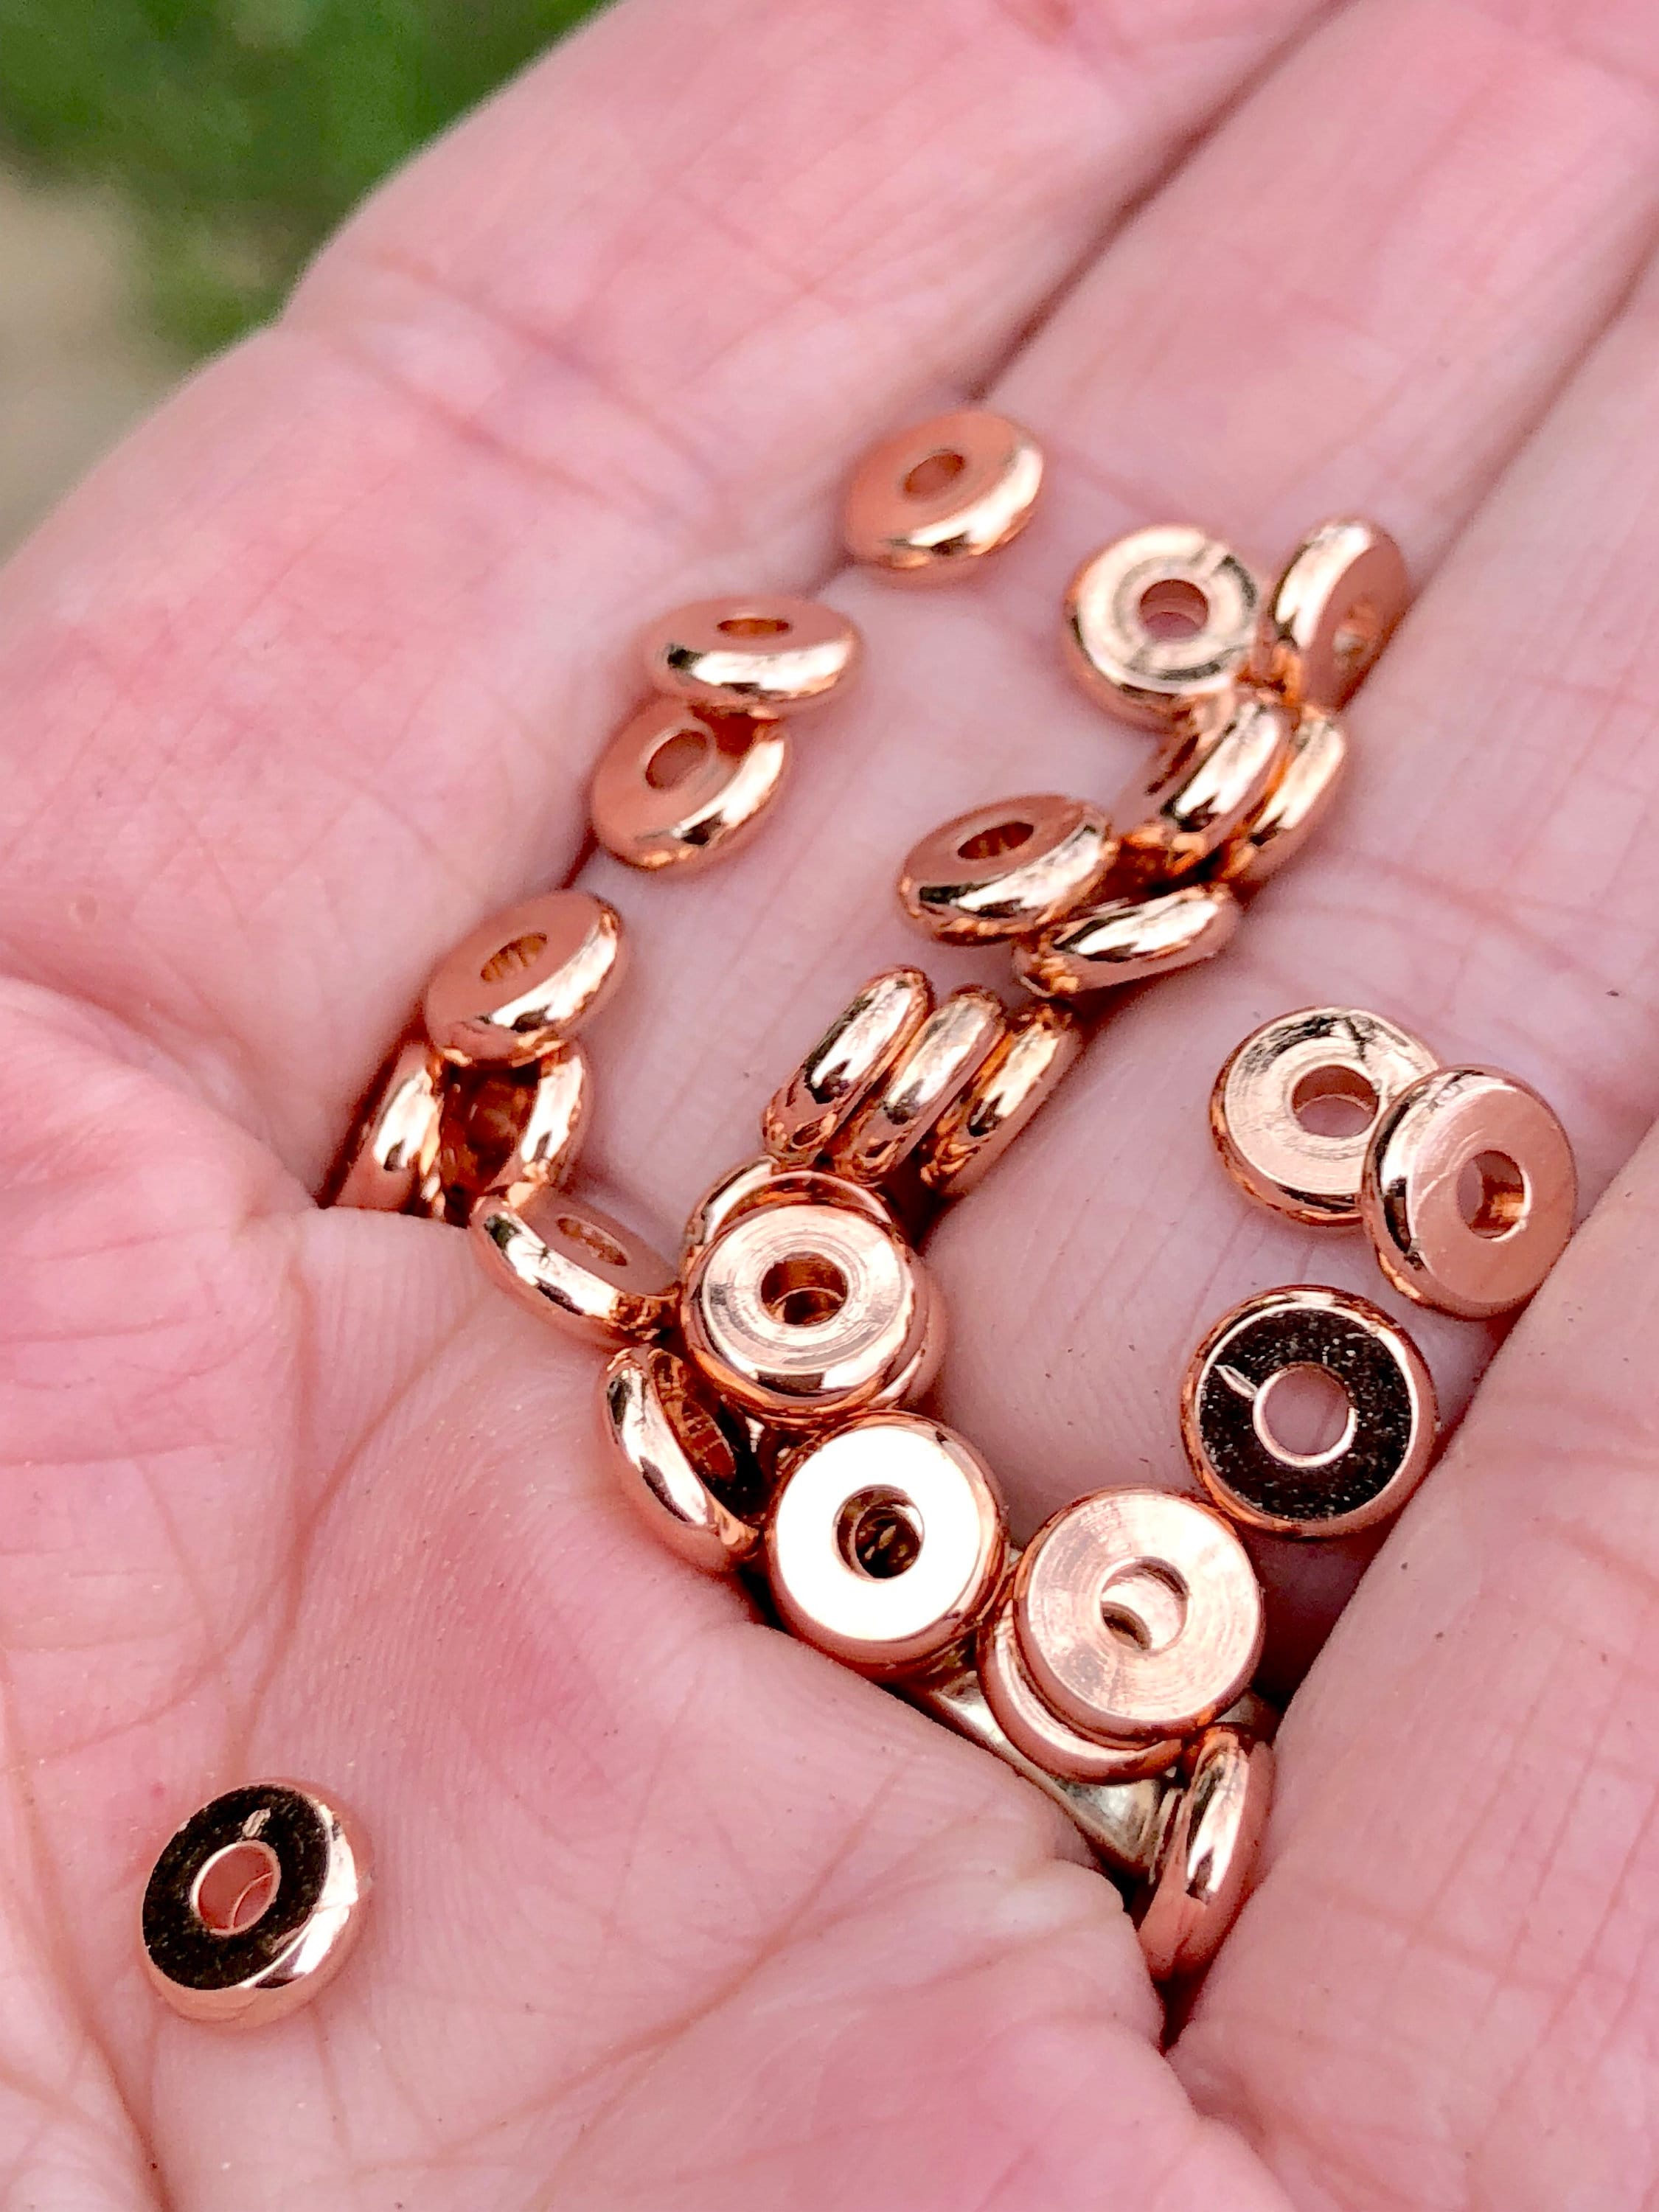 Rose Gold Flat Metal Spacer Beads, Rondelle Spacer Beads